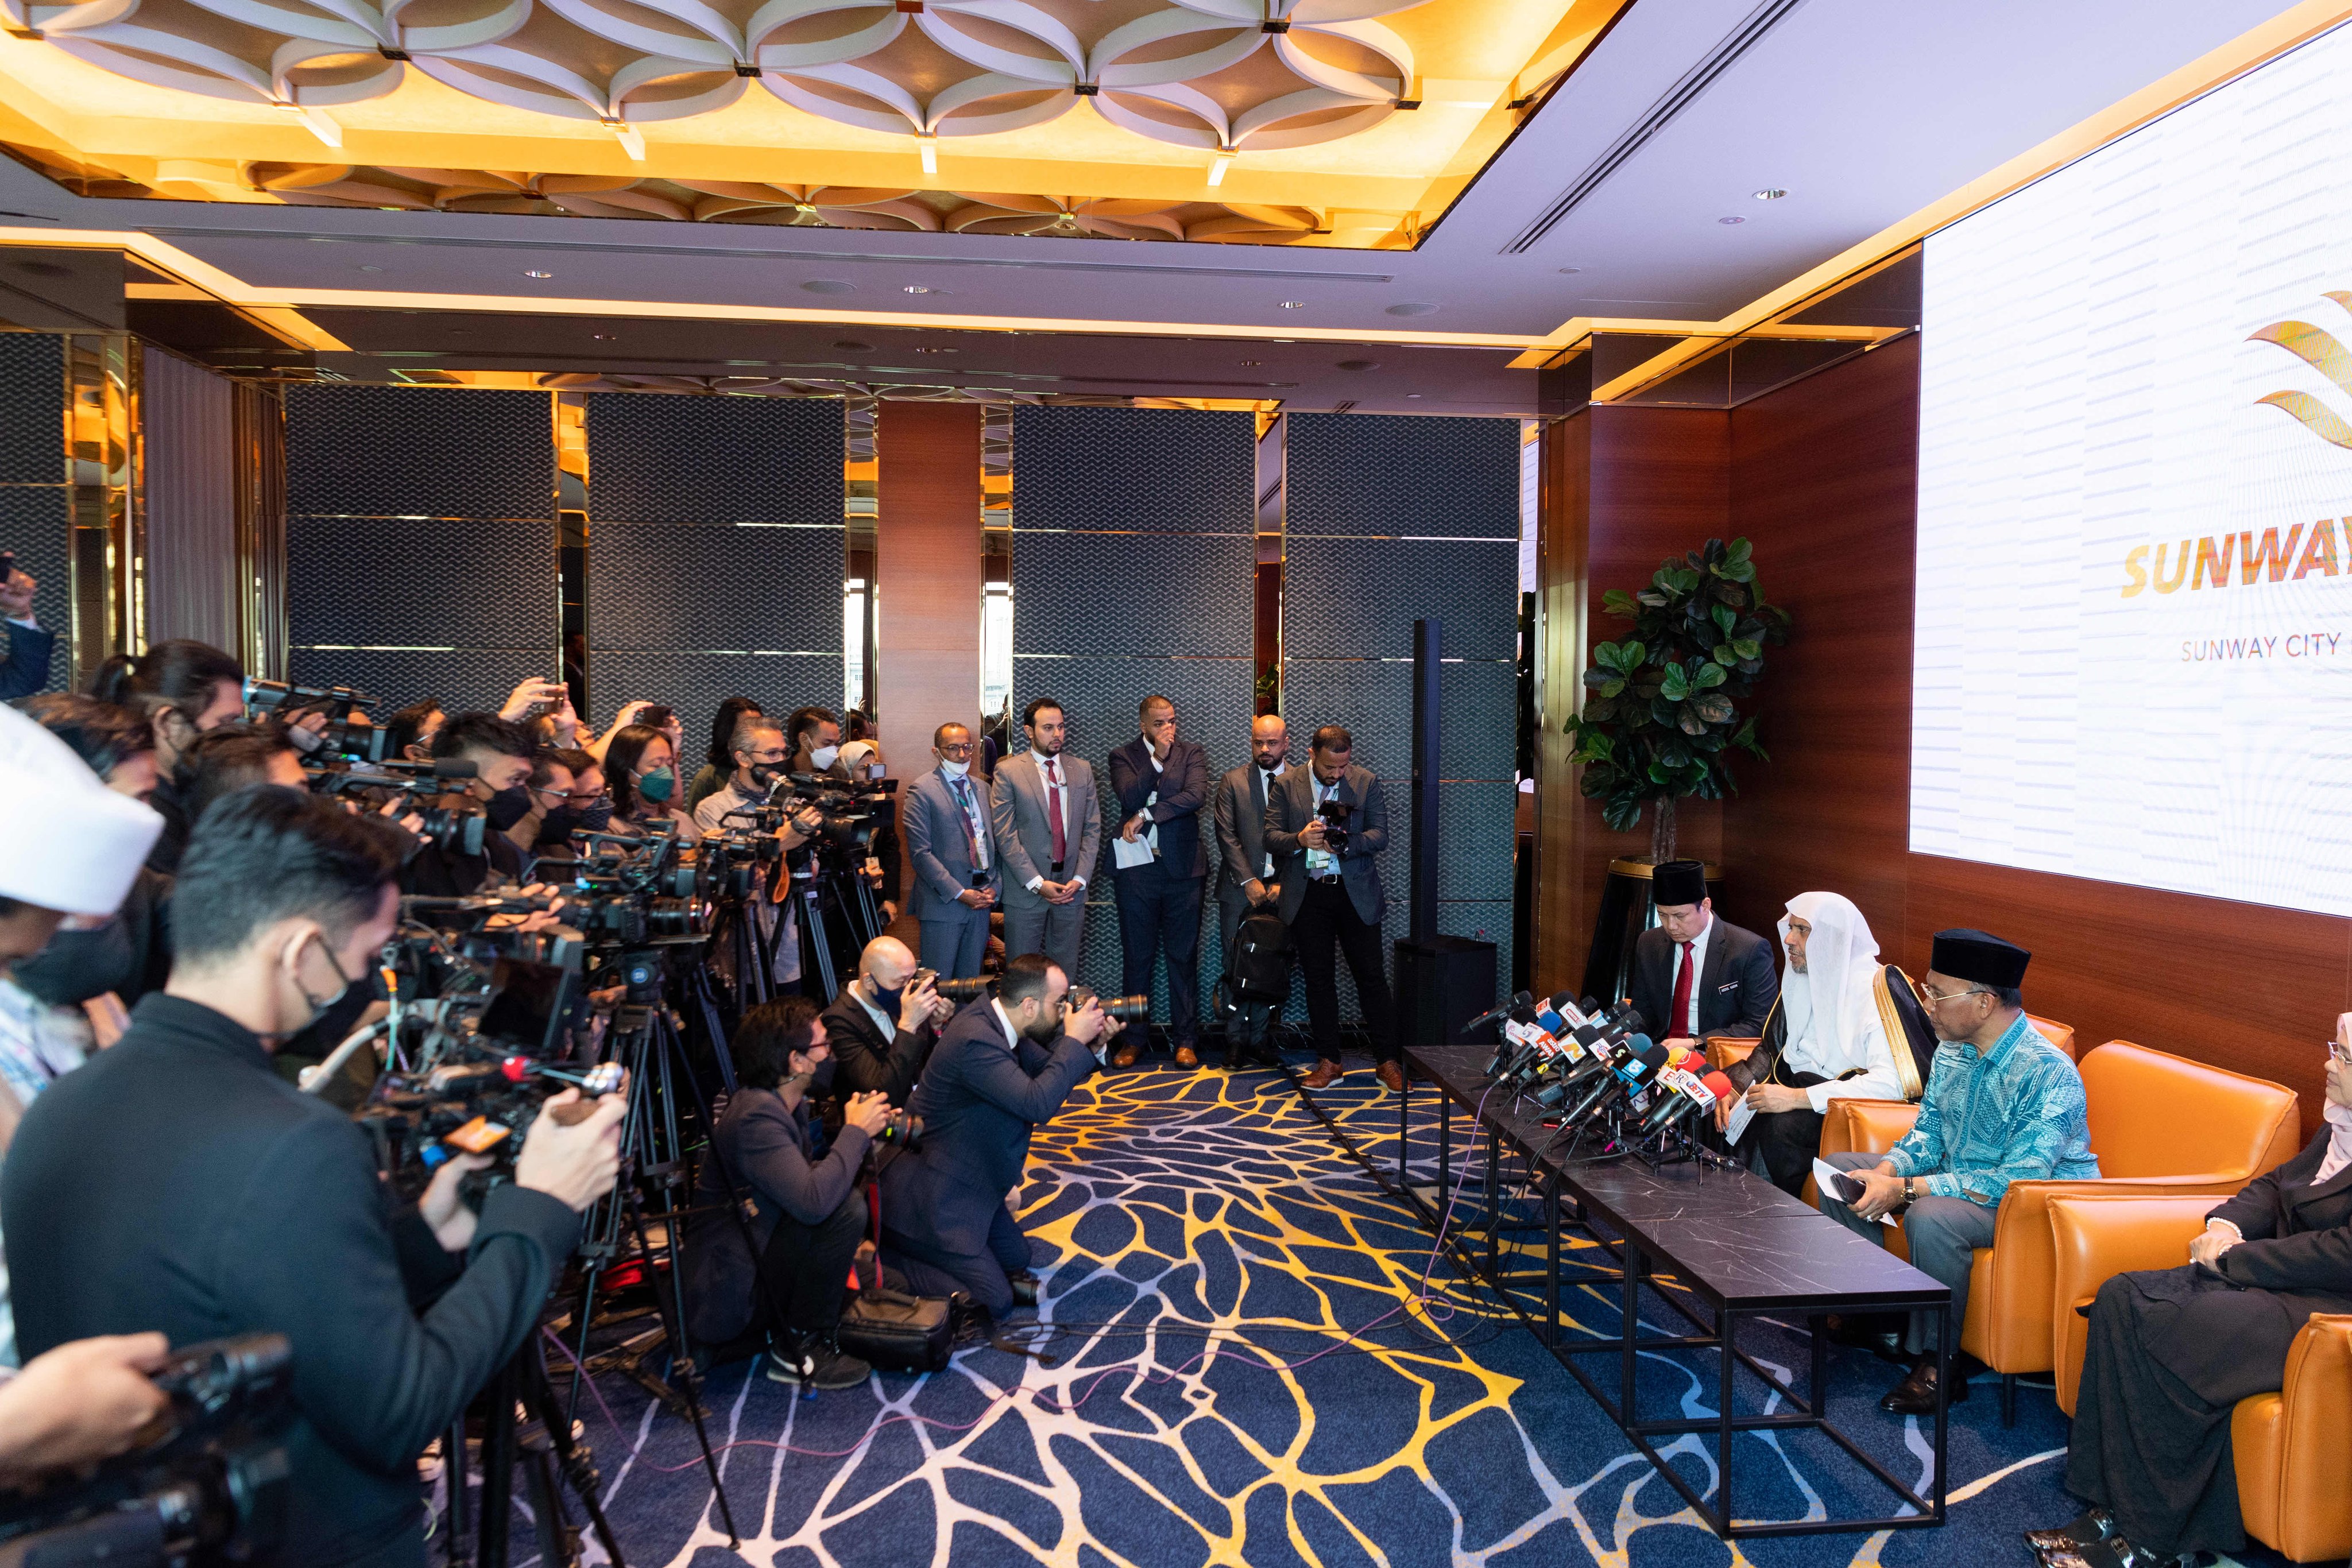 His Excellency Sheikh Dr. Mohammad Alissa told a gathering of media about the achievements of the conference of Southeast Asian scholars